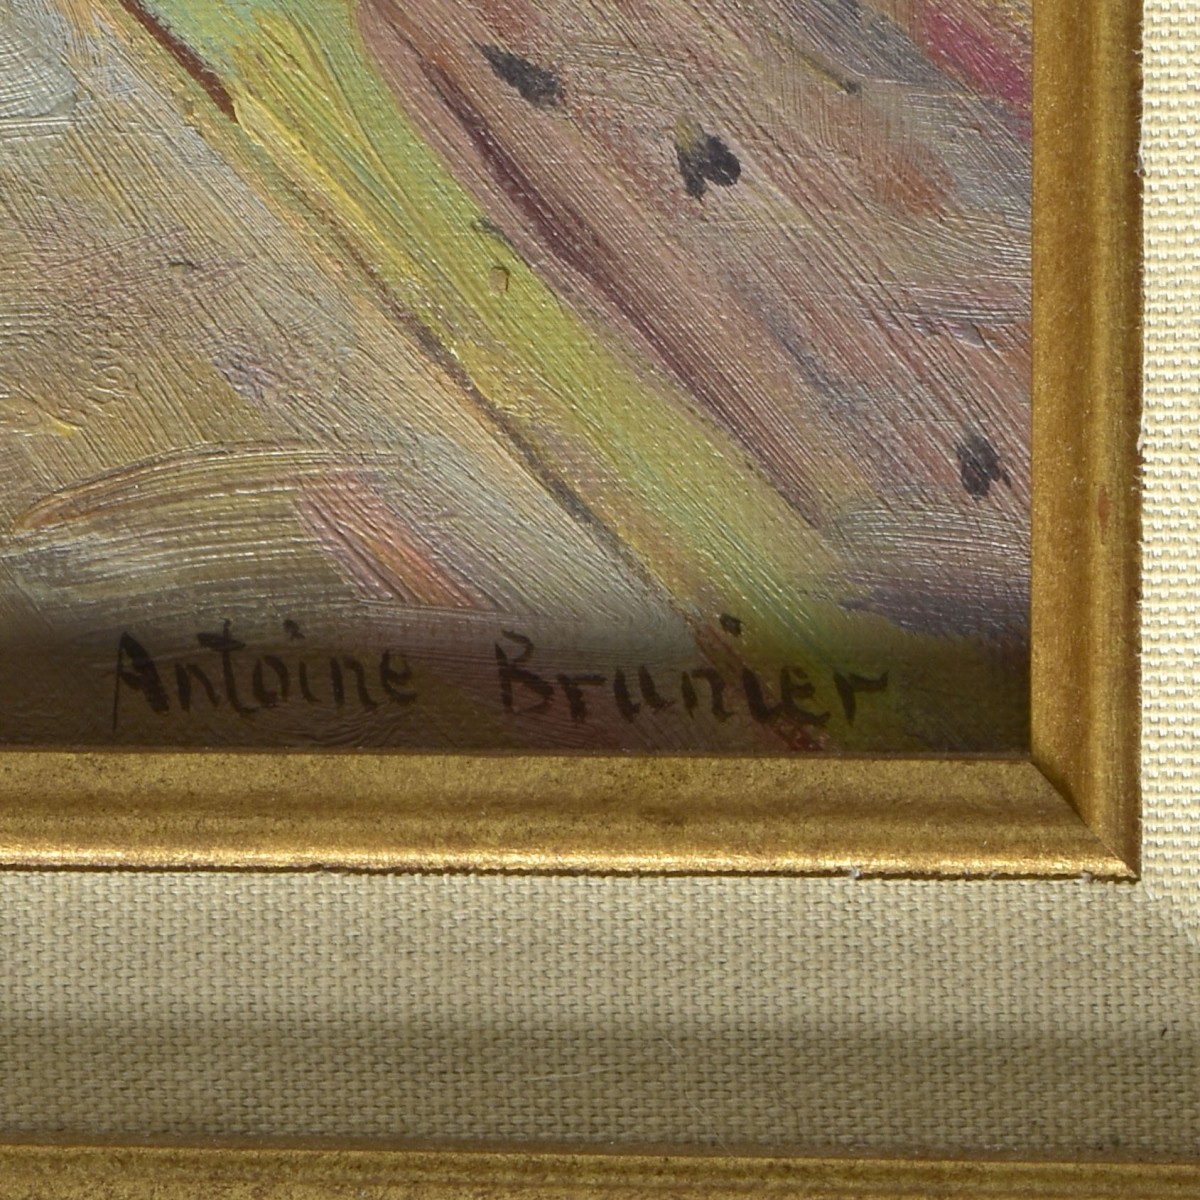 Antoine Brunier, French (20th cent.)